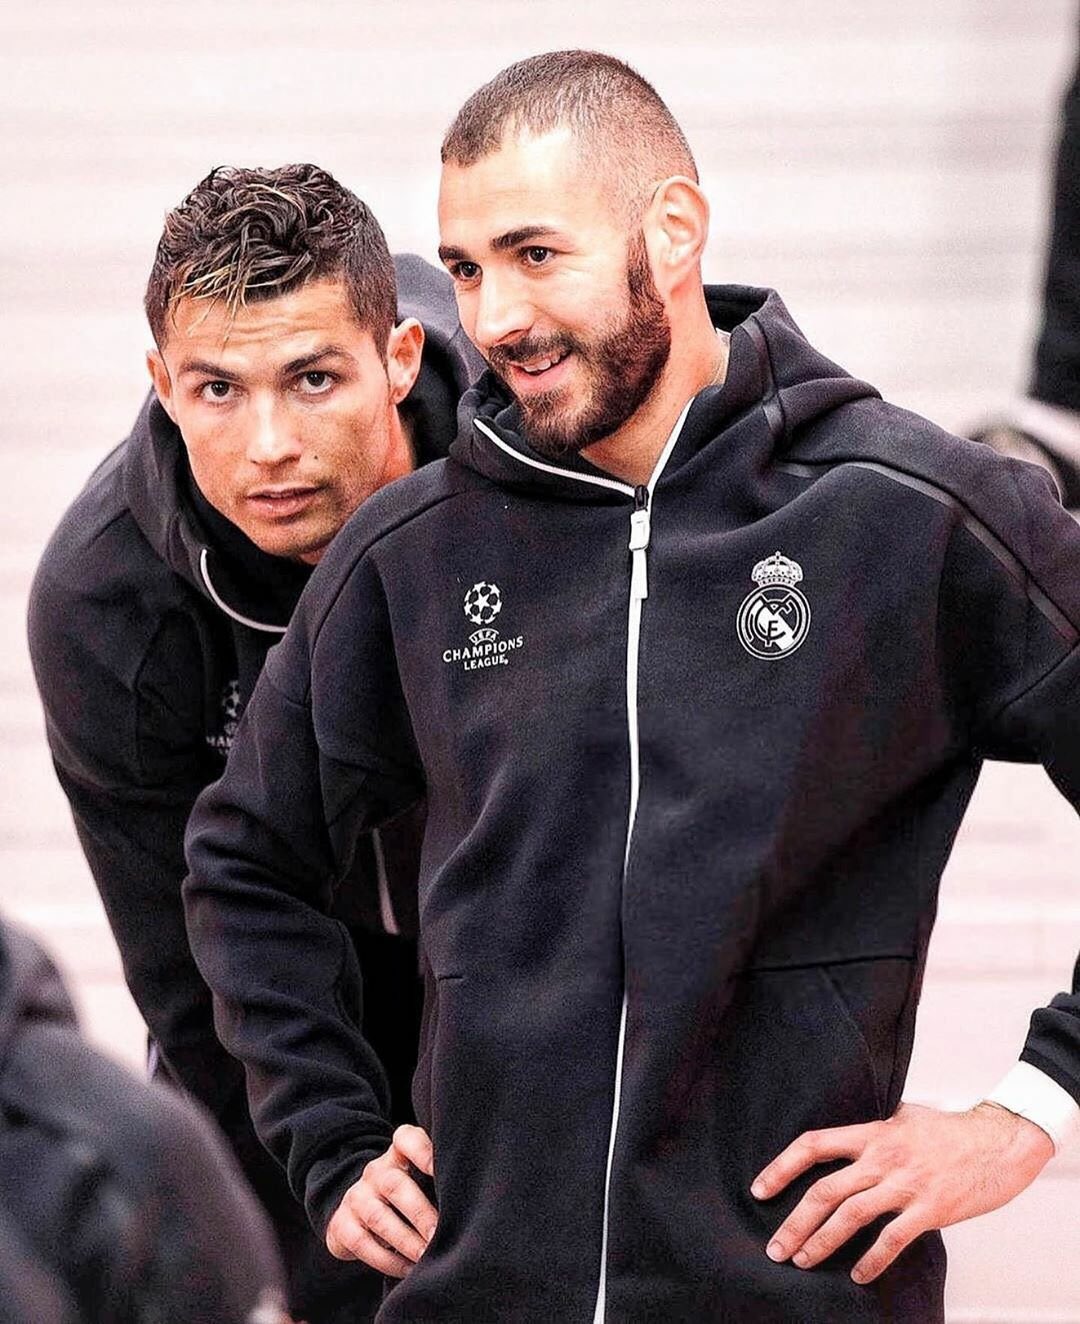 One of the best players of our generation and a world class footballer.

Happy Birthday, Karim Benzema.   